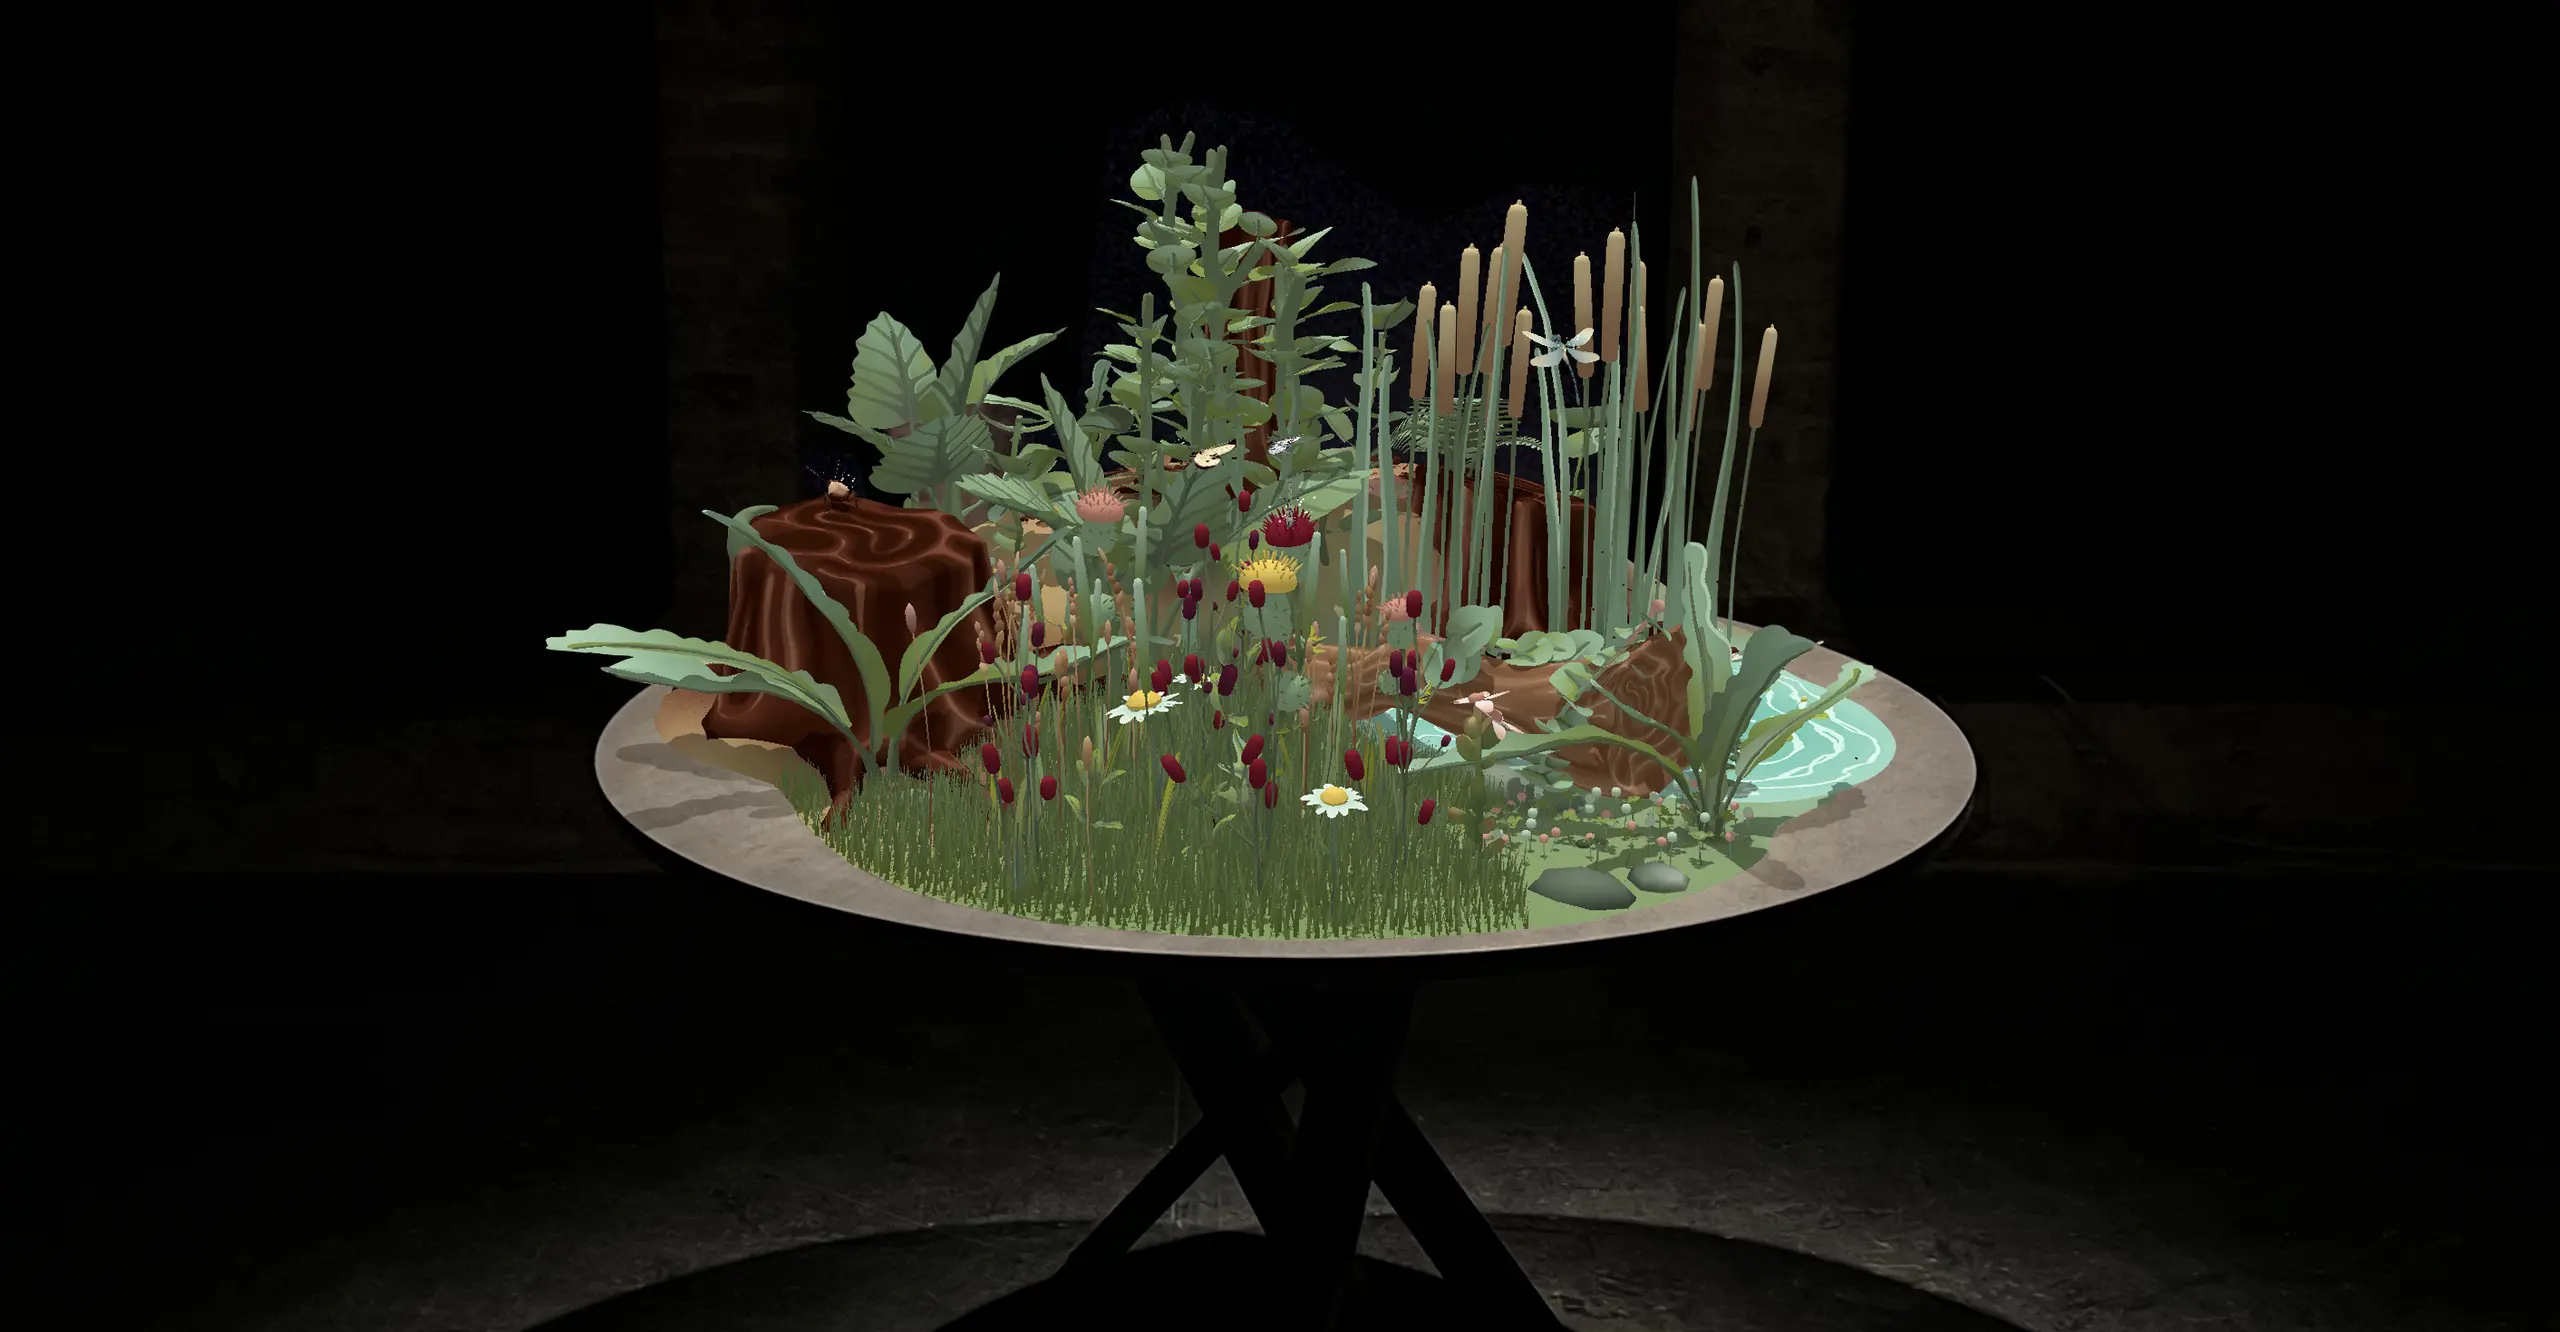 A cgi landscape of a natural ecosystem including daisies, leaves, logs, and water appears on a round table in a dark space